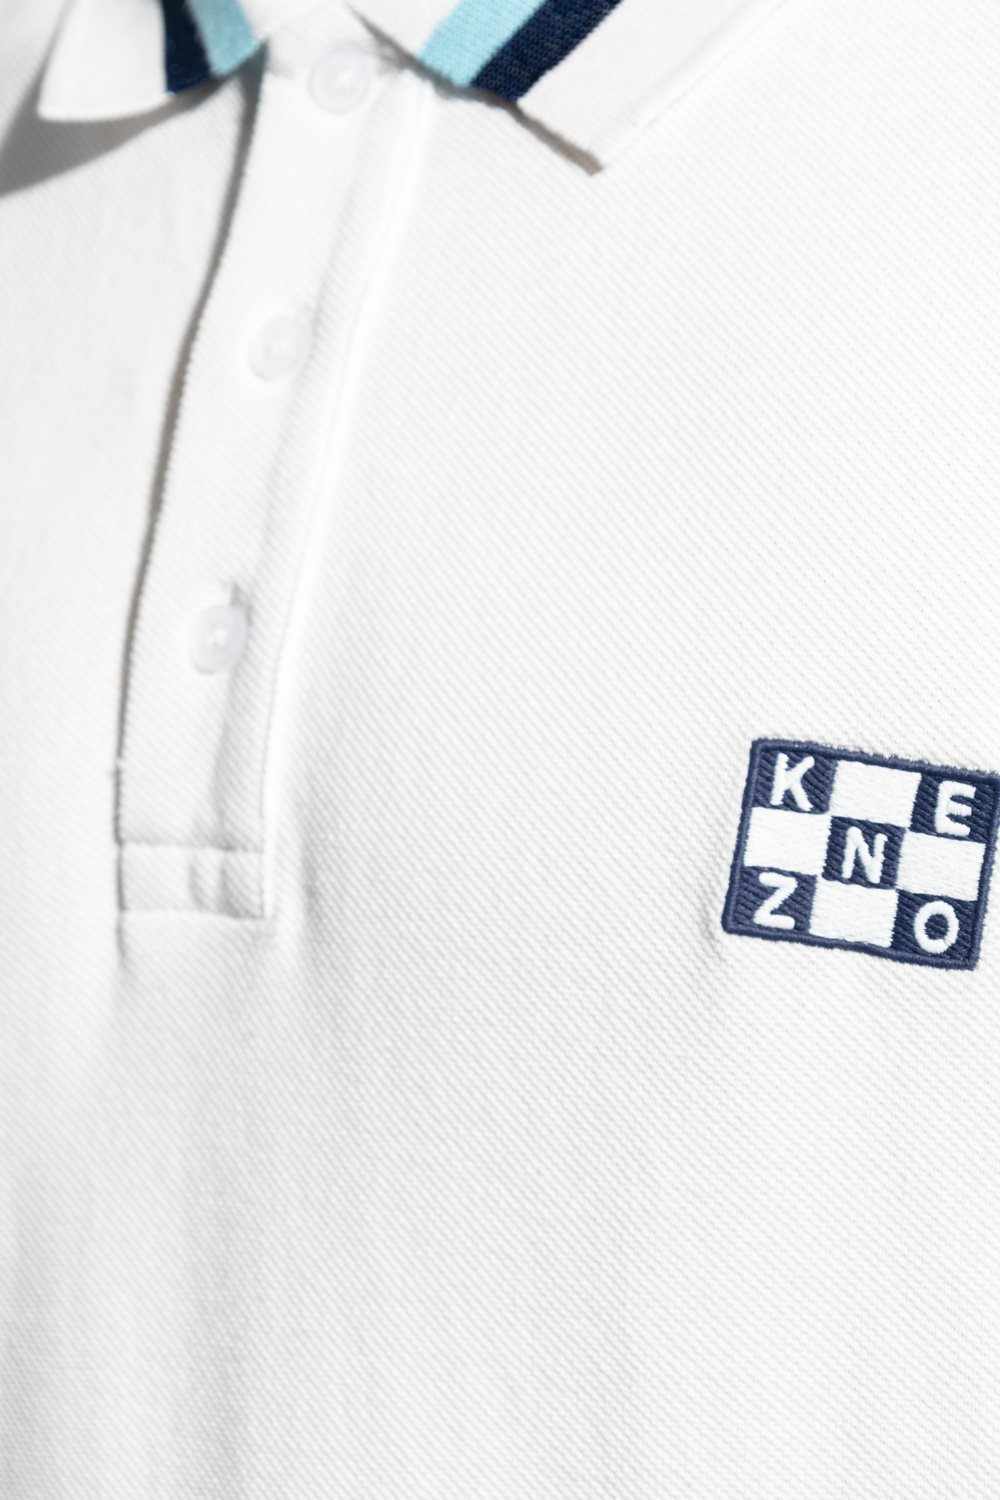 Kenzo has become a global brand in Water Polo and Swimming